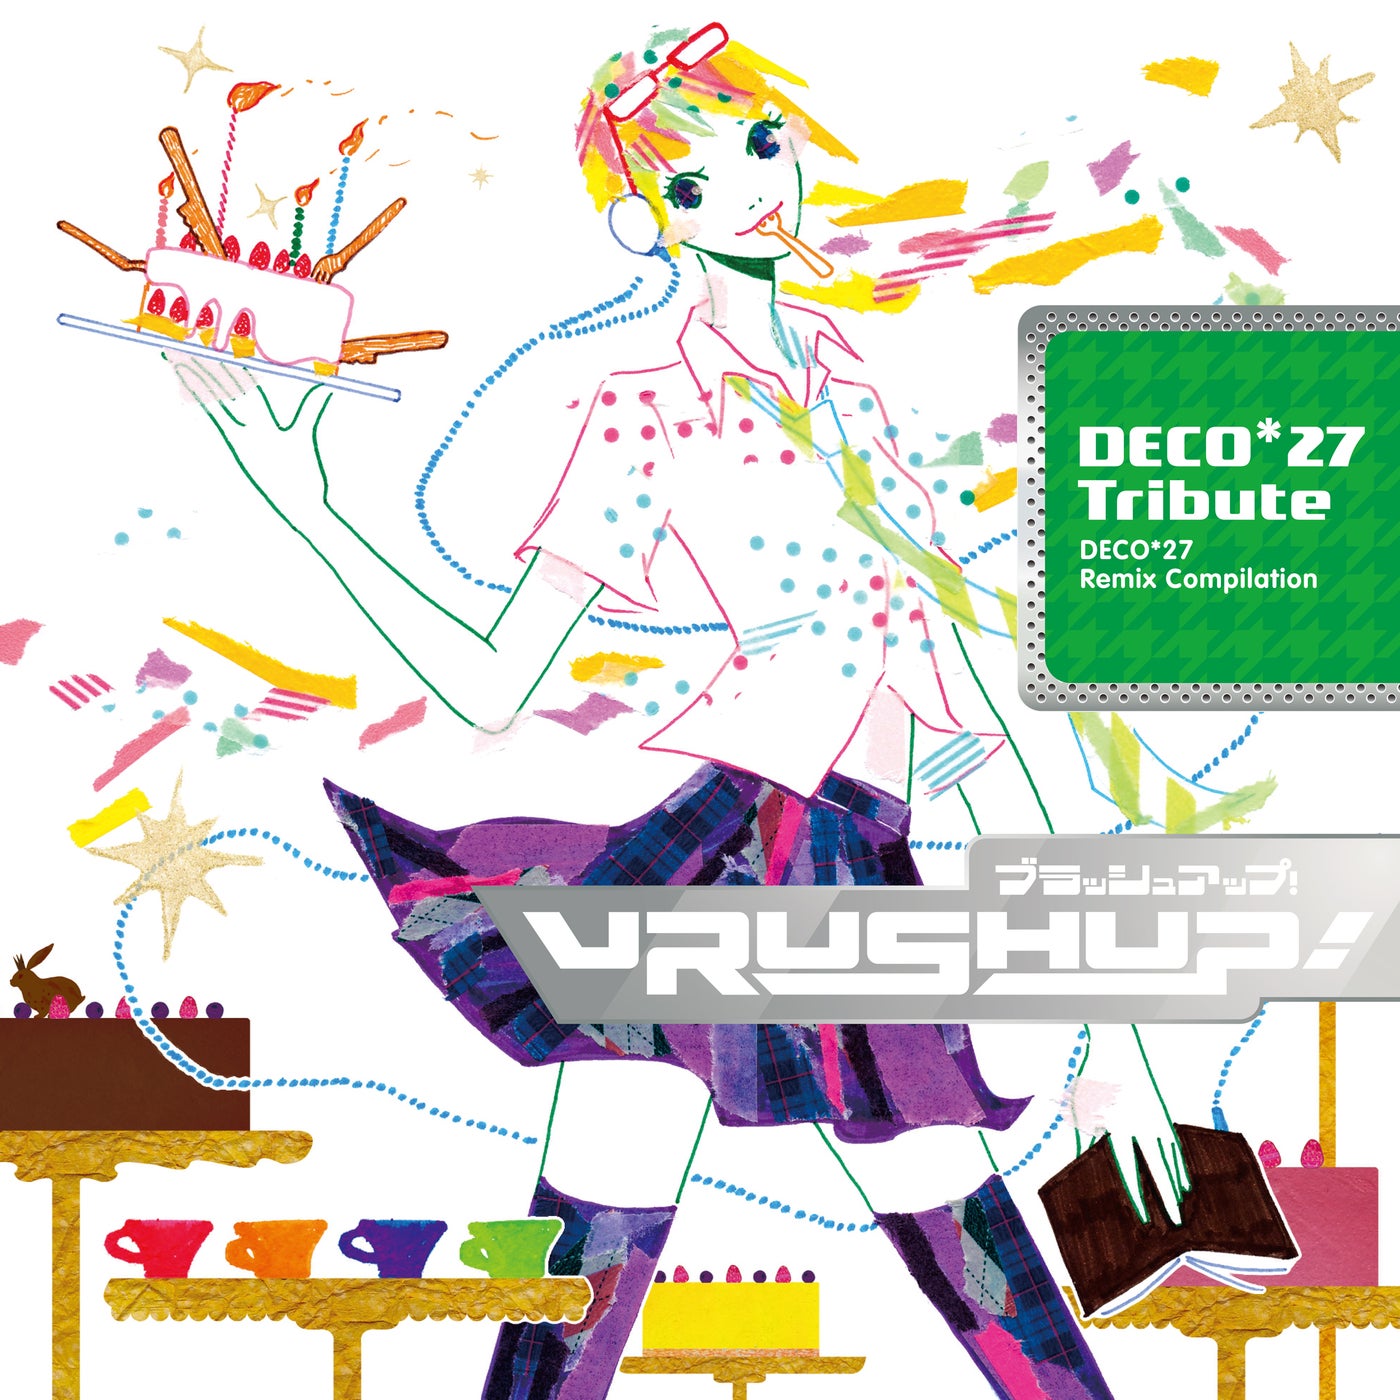 VRUSH UP! - DECO*27 Tribute-